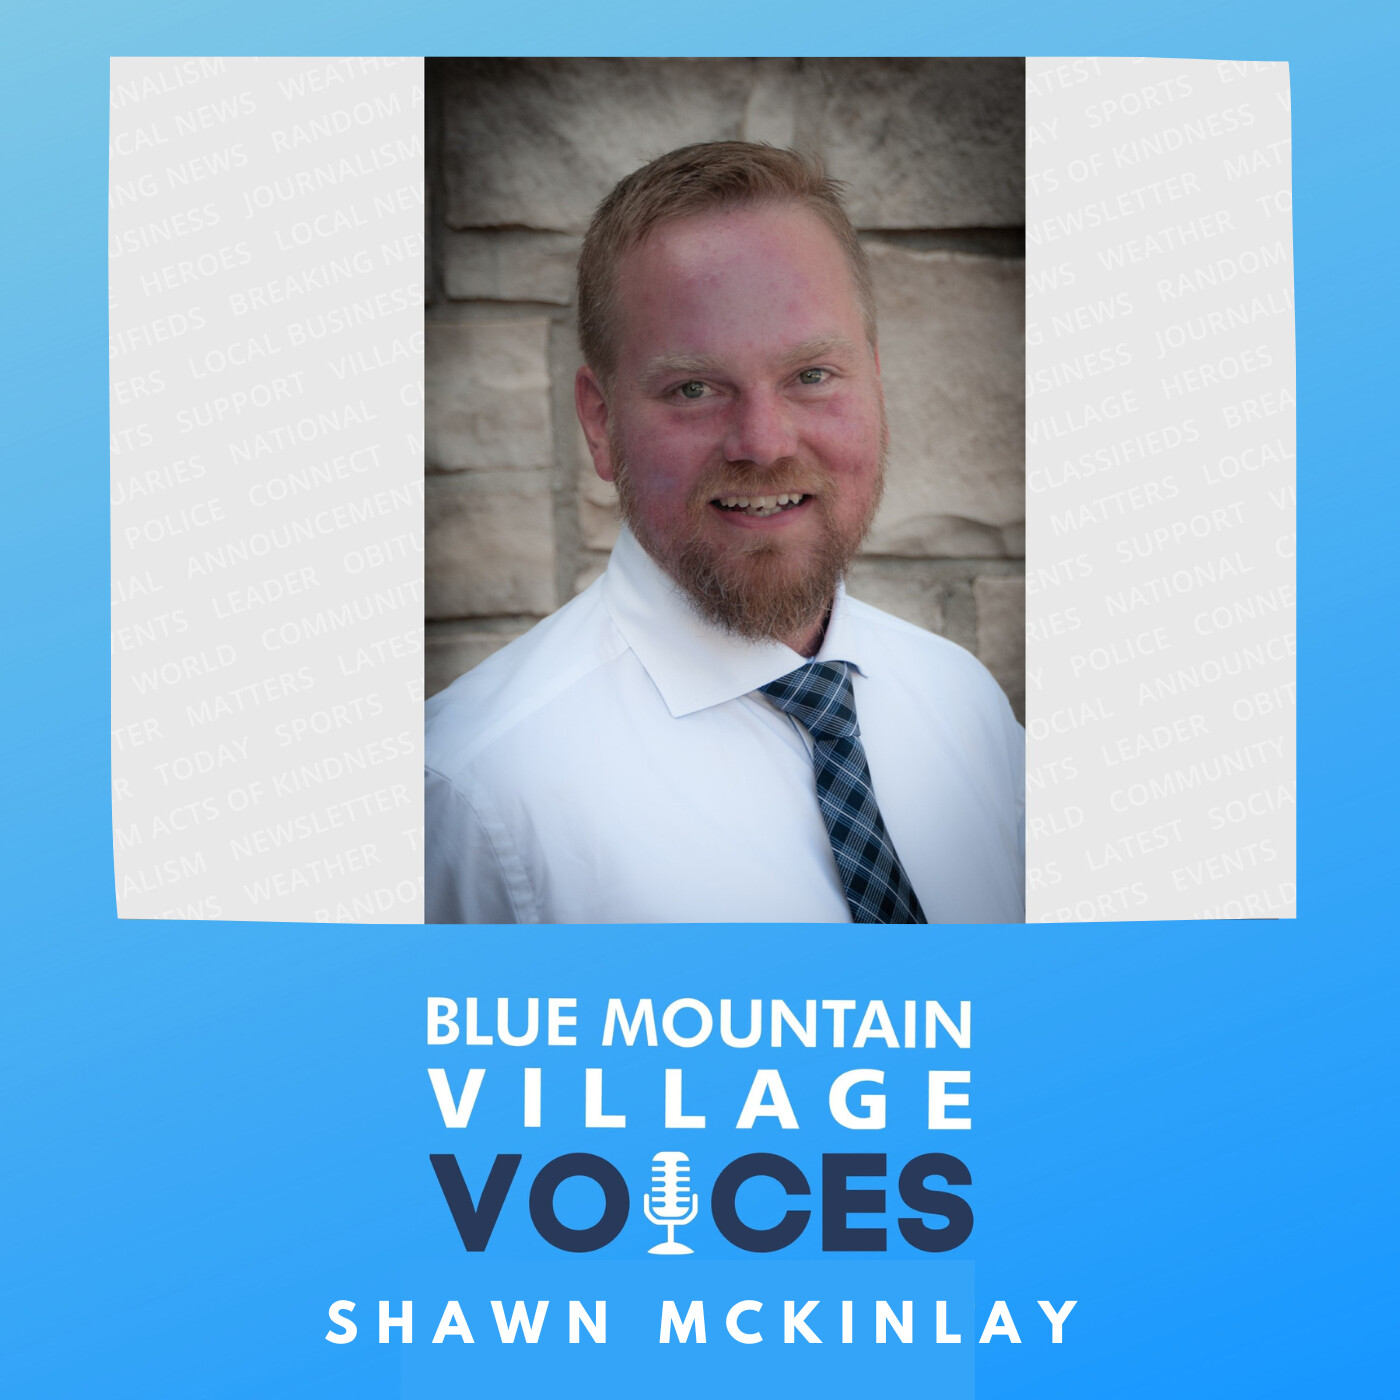 Shawn McKinlay: Candidate for Town Councillor Image